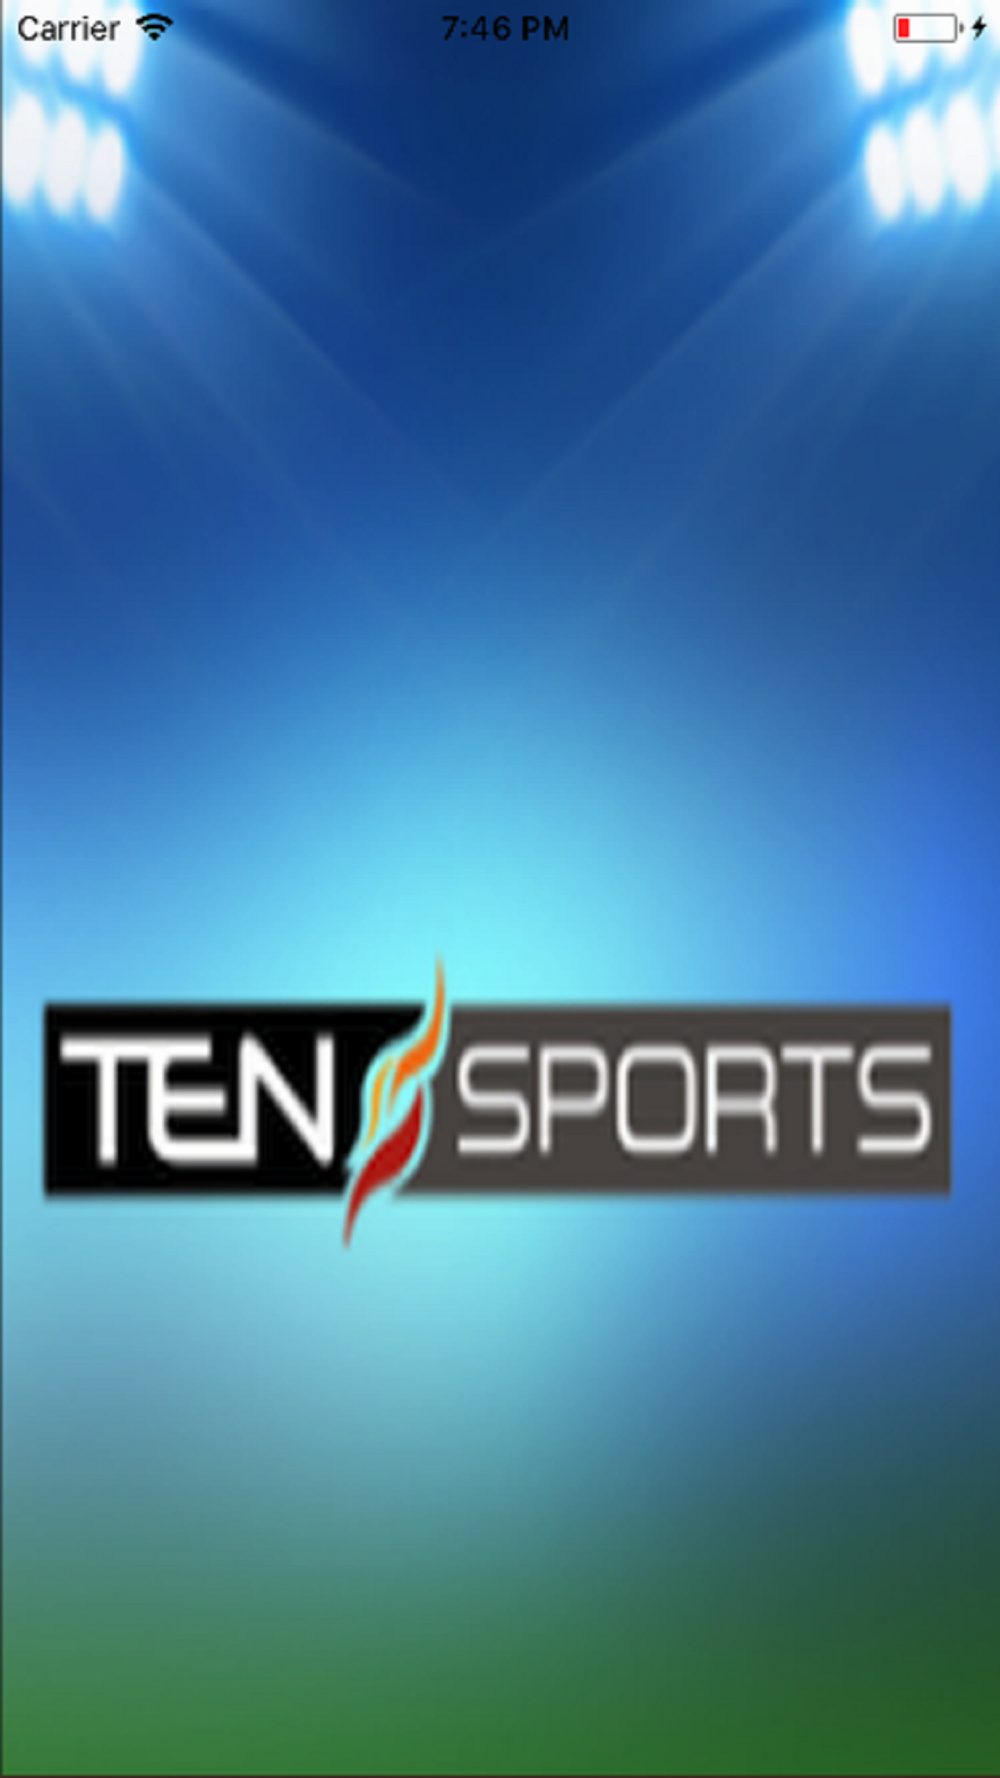 Ten Sports Live Streaming Free Download App for iPhone